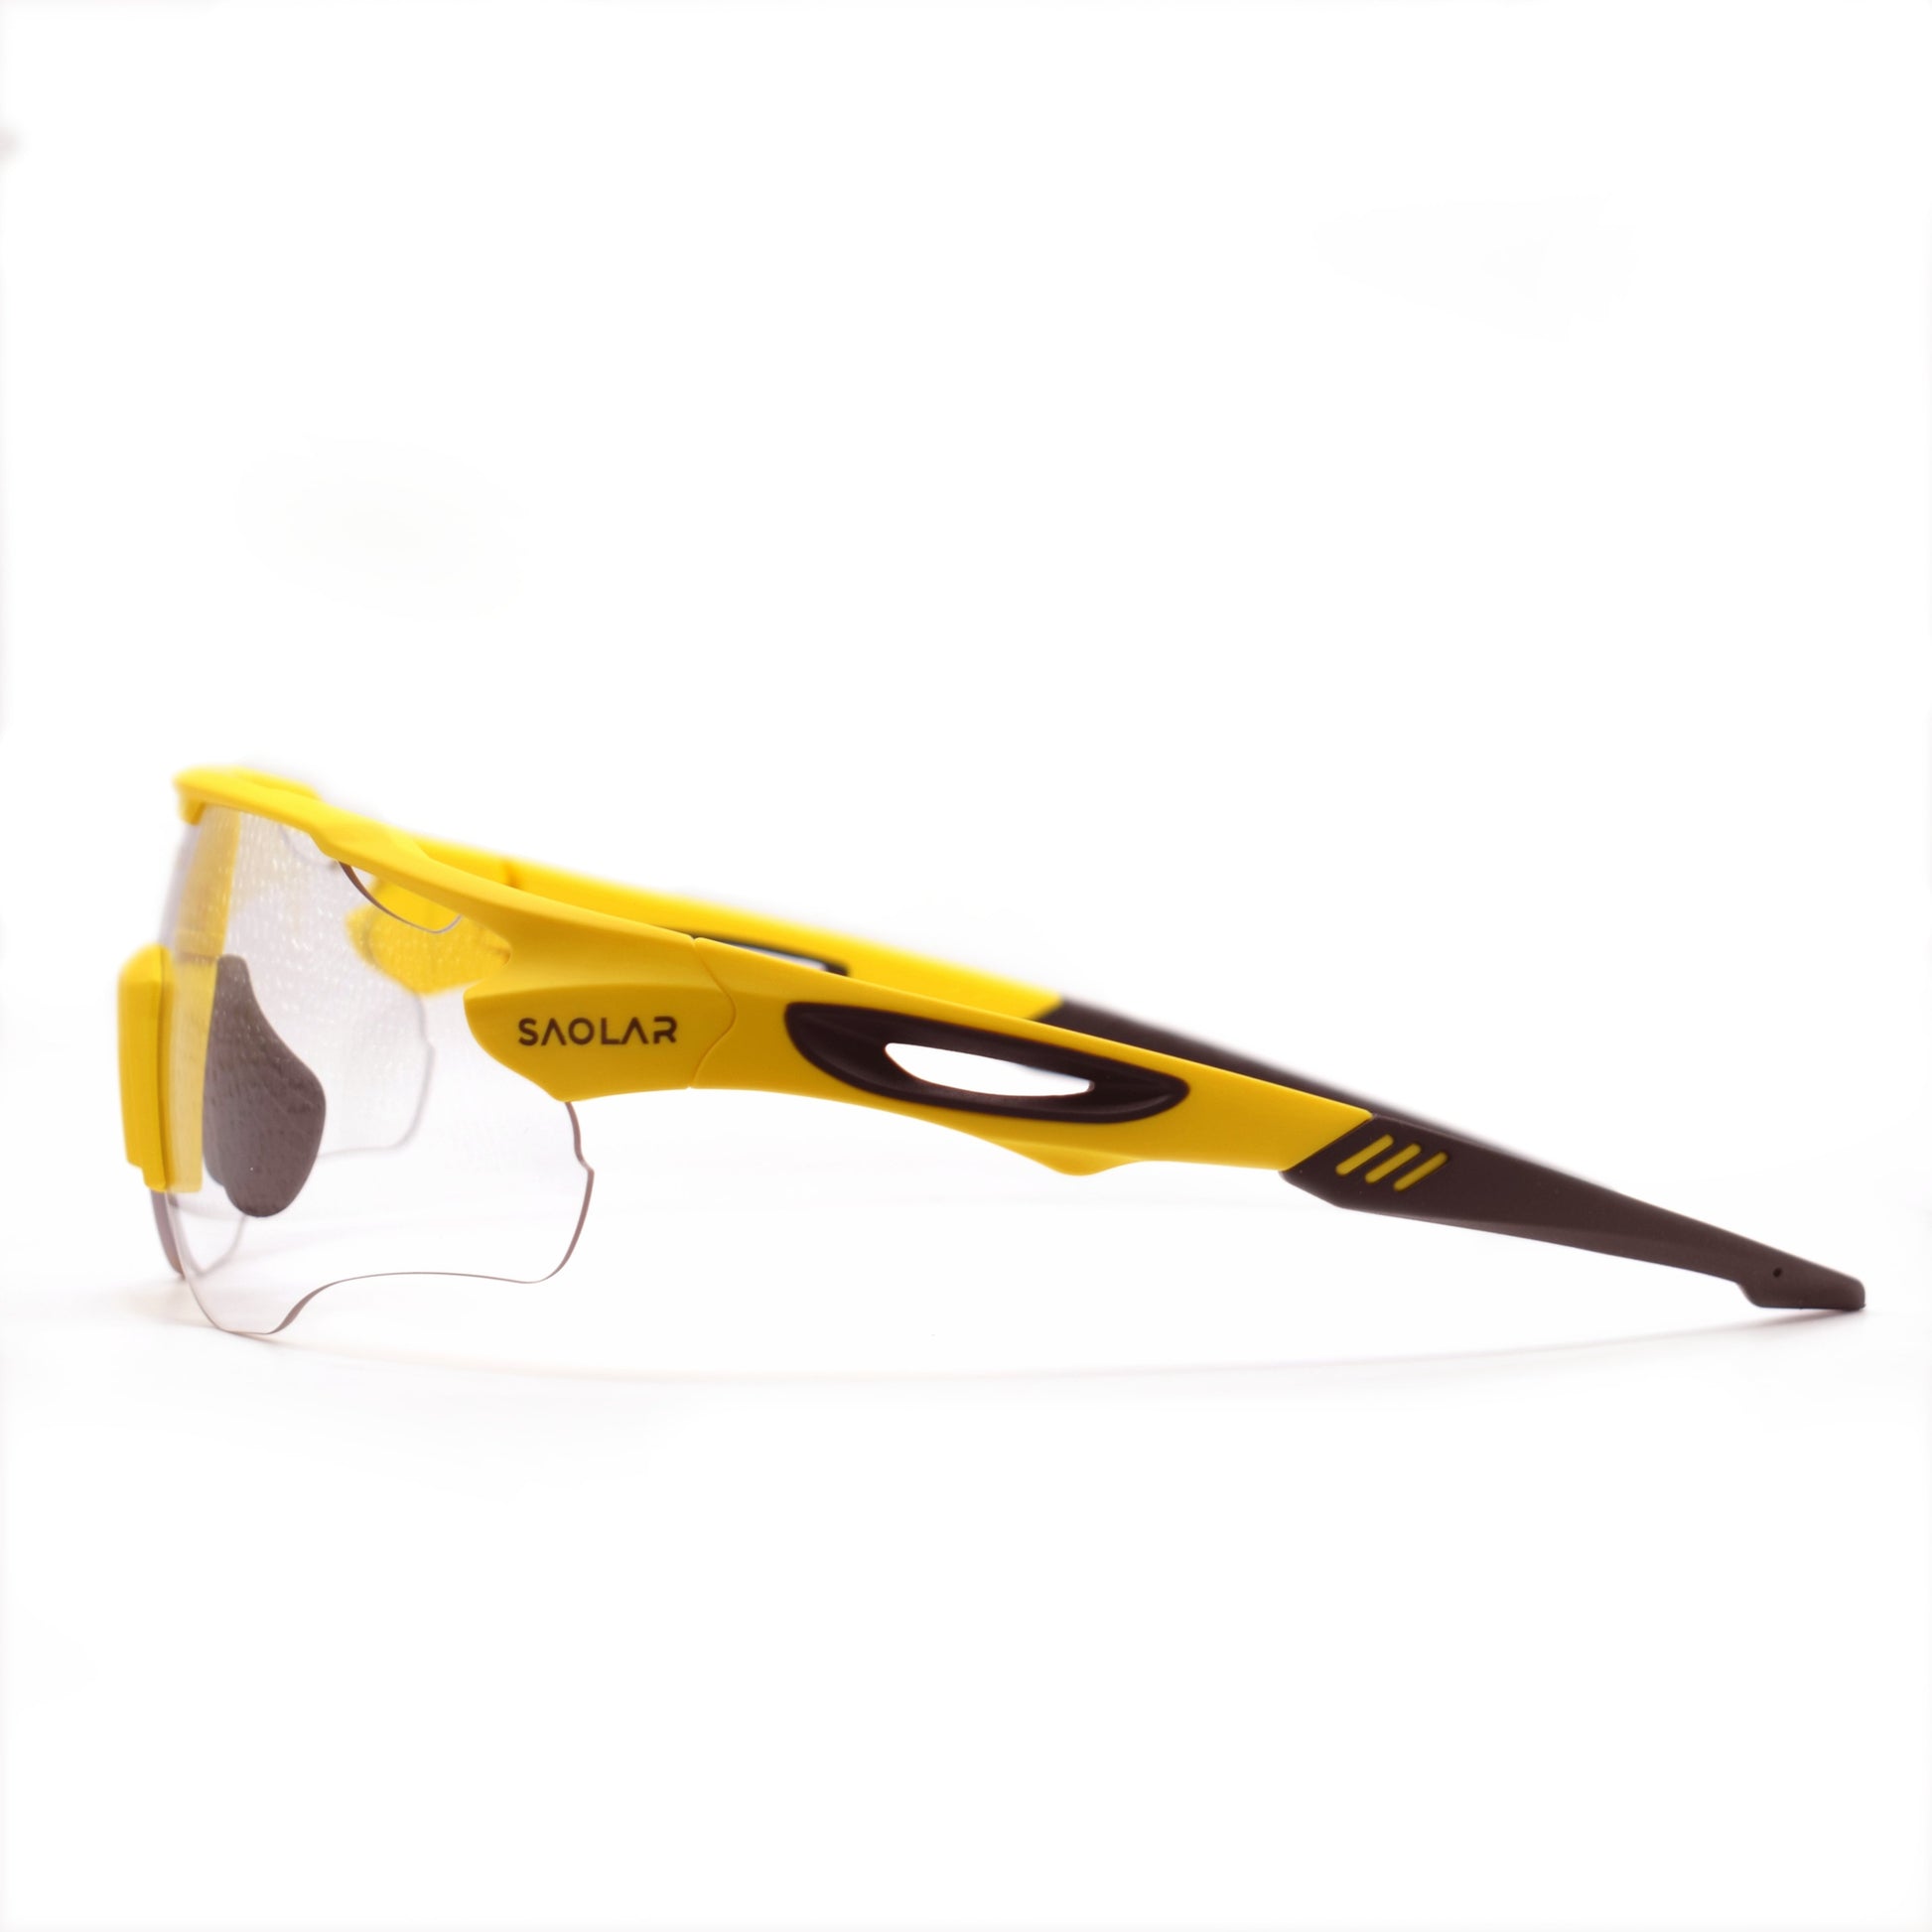 Helios Photochromic Cycling Glasses - Left view